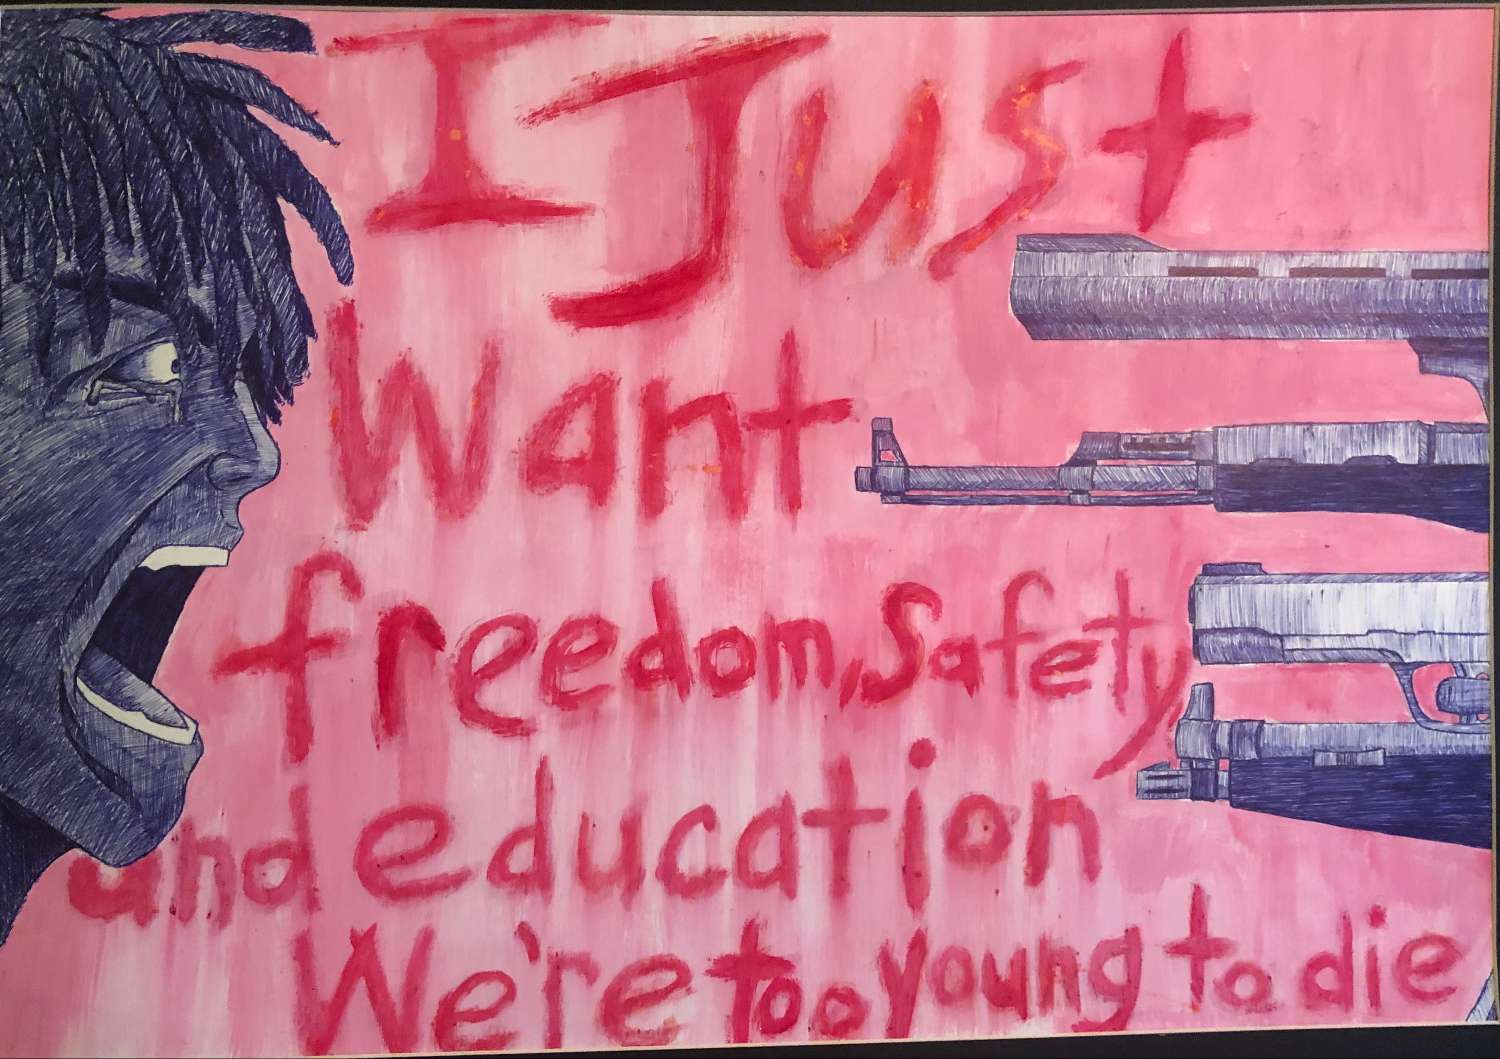 Nicholas McDonald 1st place
Whitehaven High School

This piece of art was inspired by the various student protests carried out by the victims of the many school shootings that took place in 2018. The message is intended to capture how I and many othe